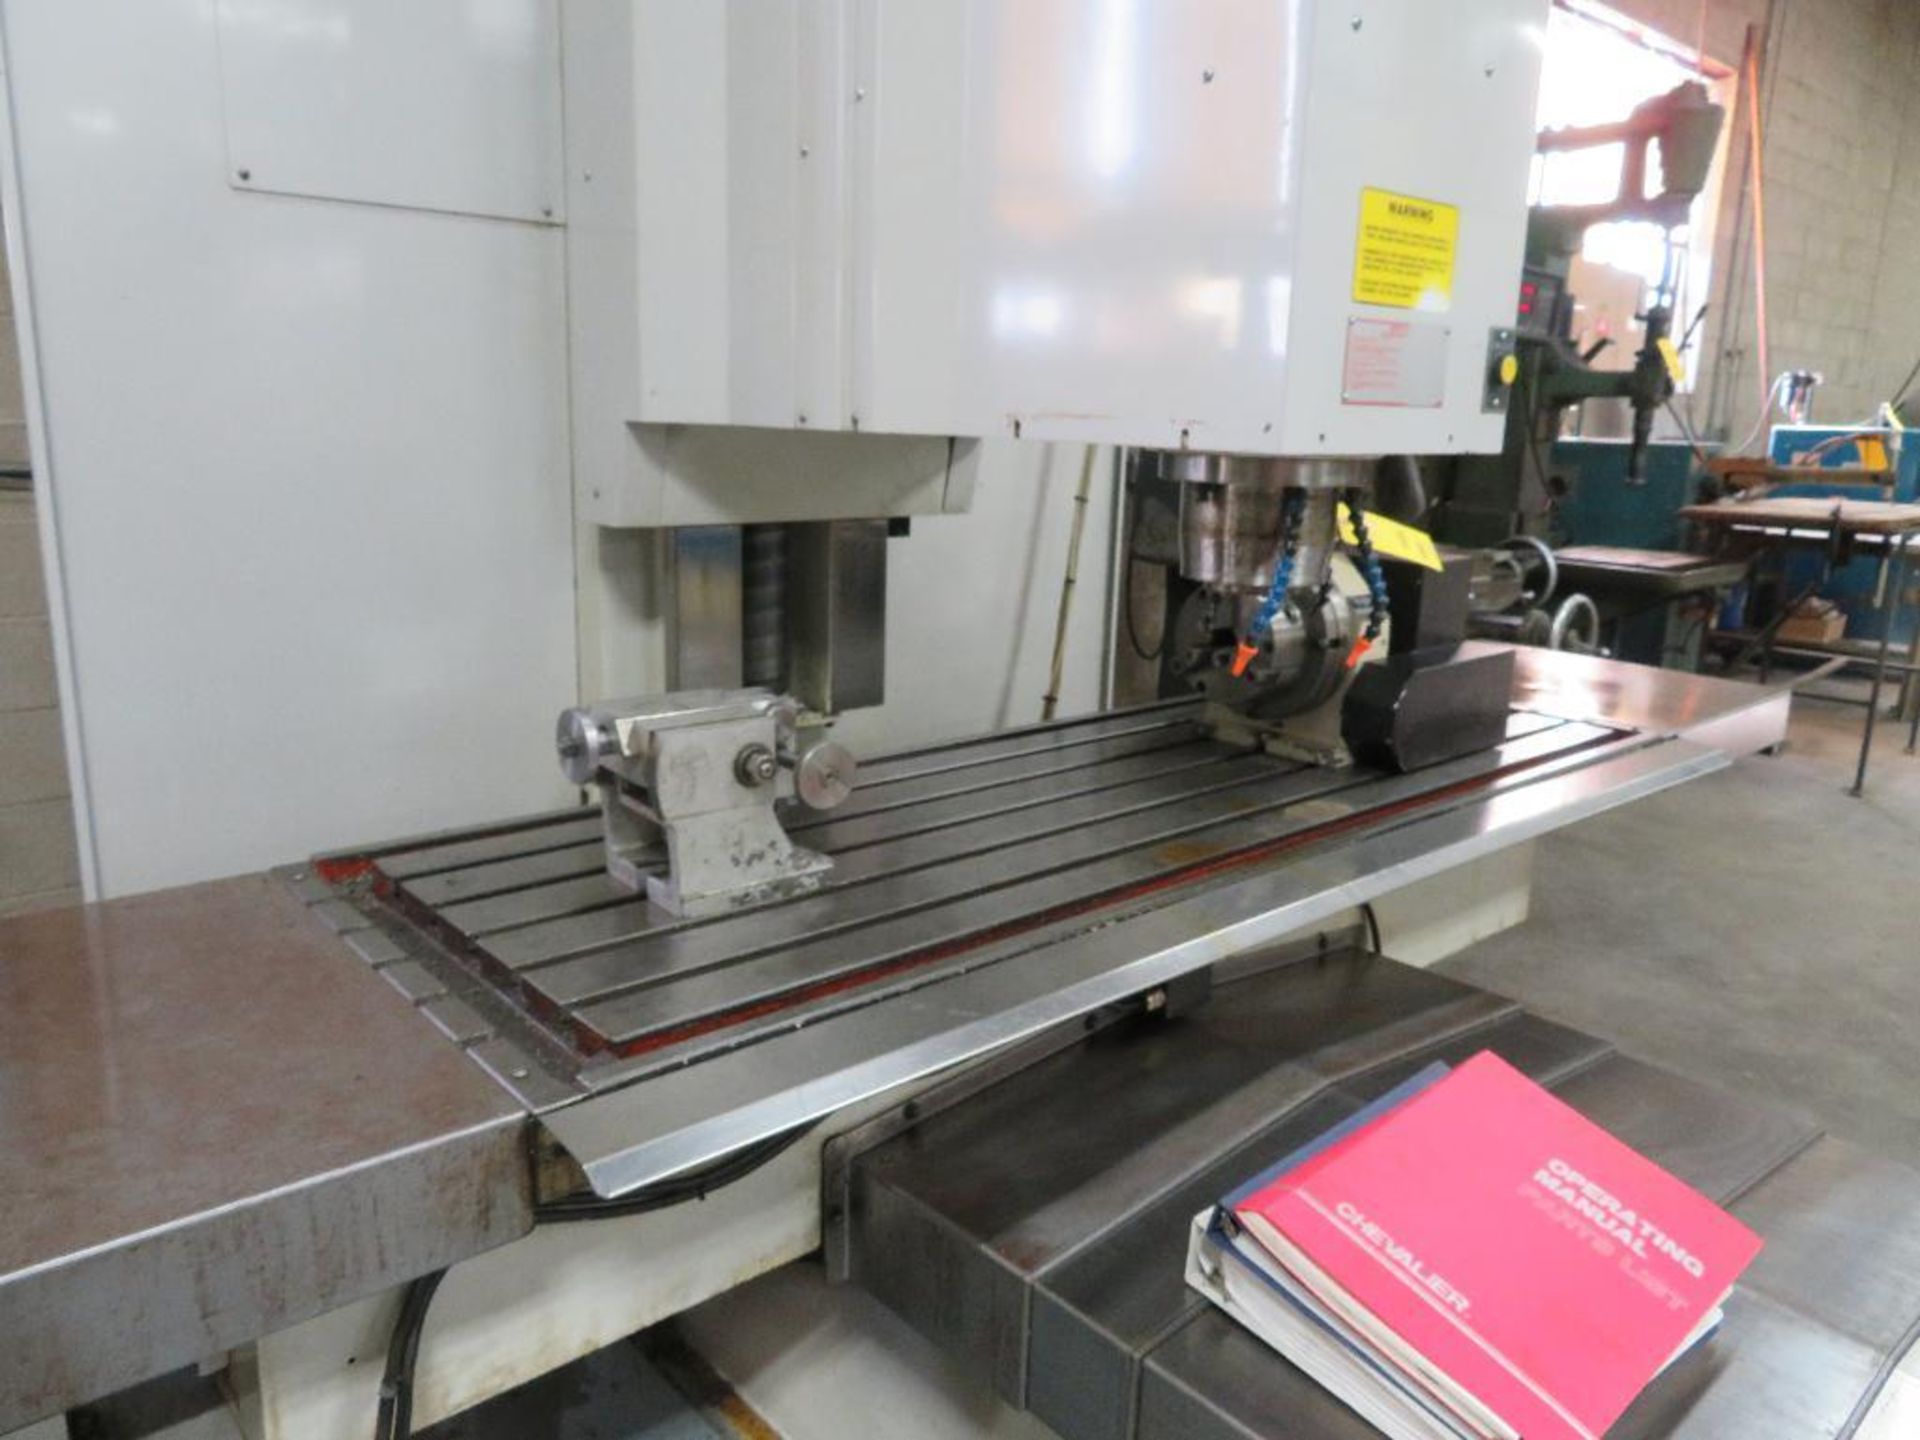 Milltronics 4-Axis CNC Vertical Mill Model RH-30, Series G, S/N 9080(0617), 24 in. x 66 in. Work - Image 3 of 6